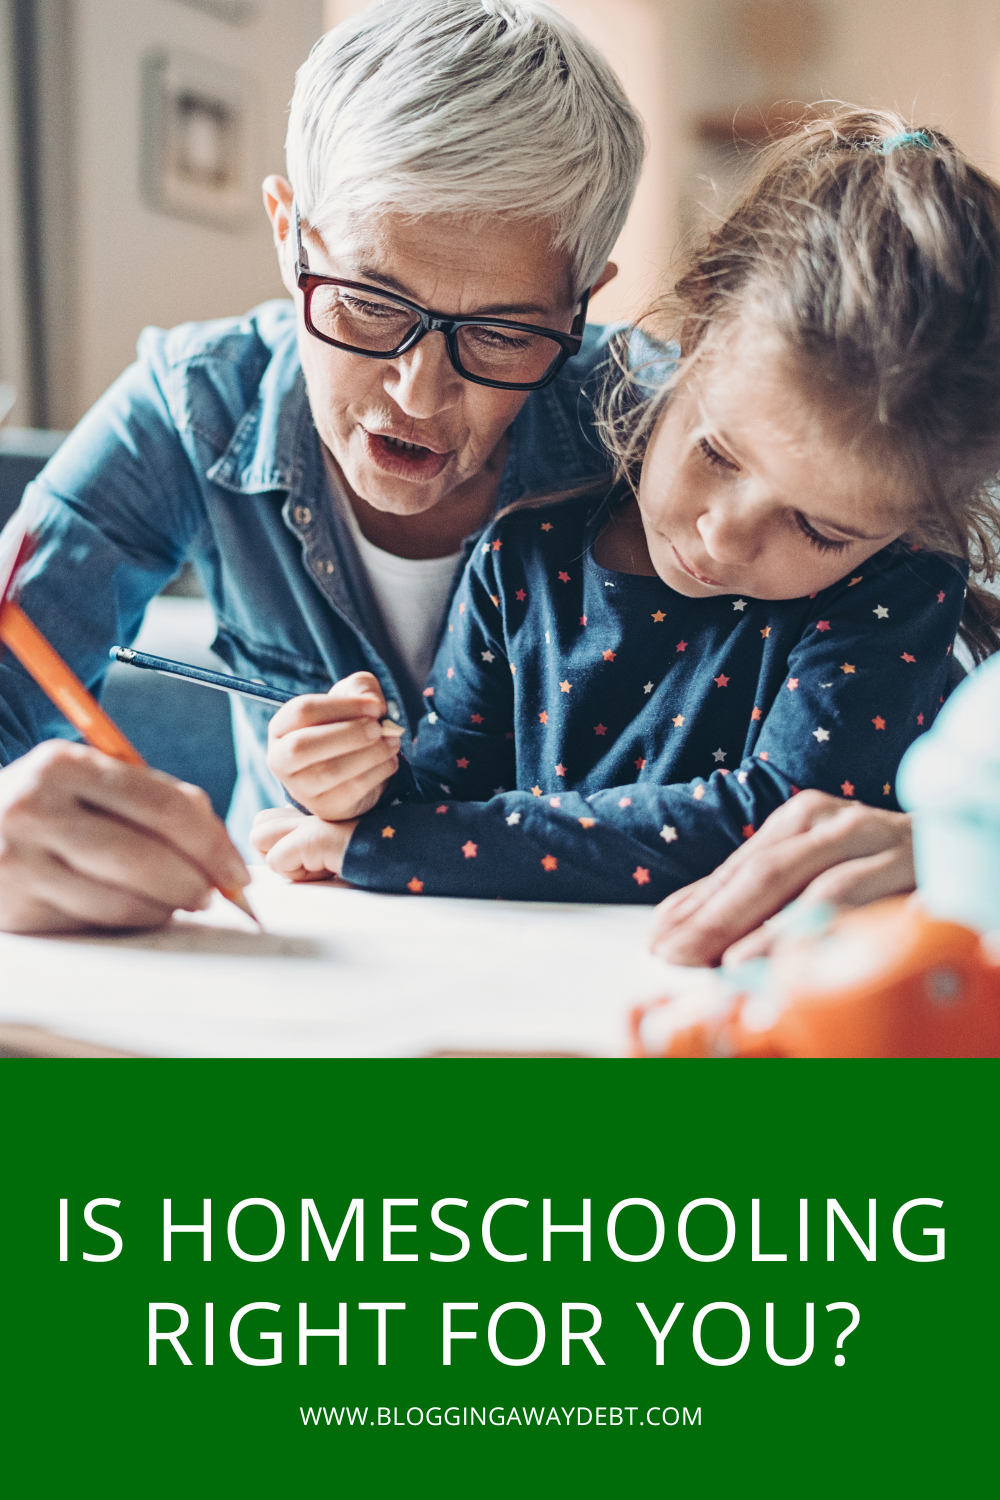 Is Homeschooling Right for You